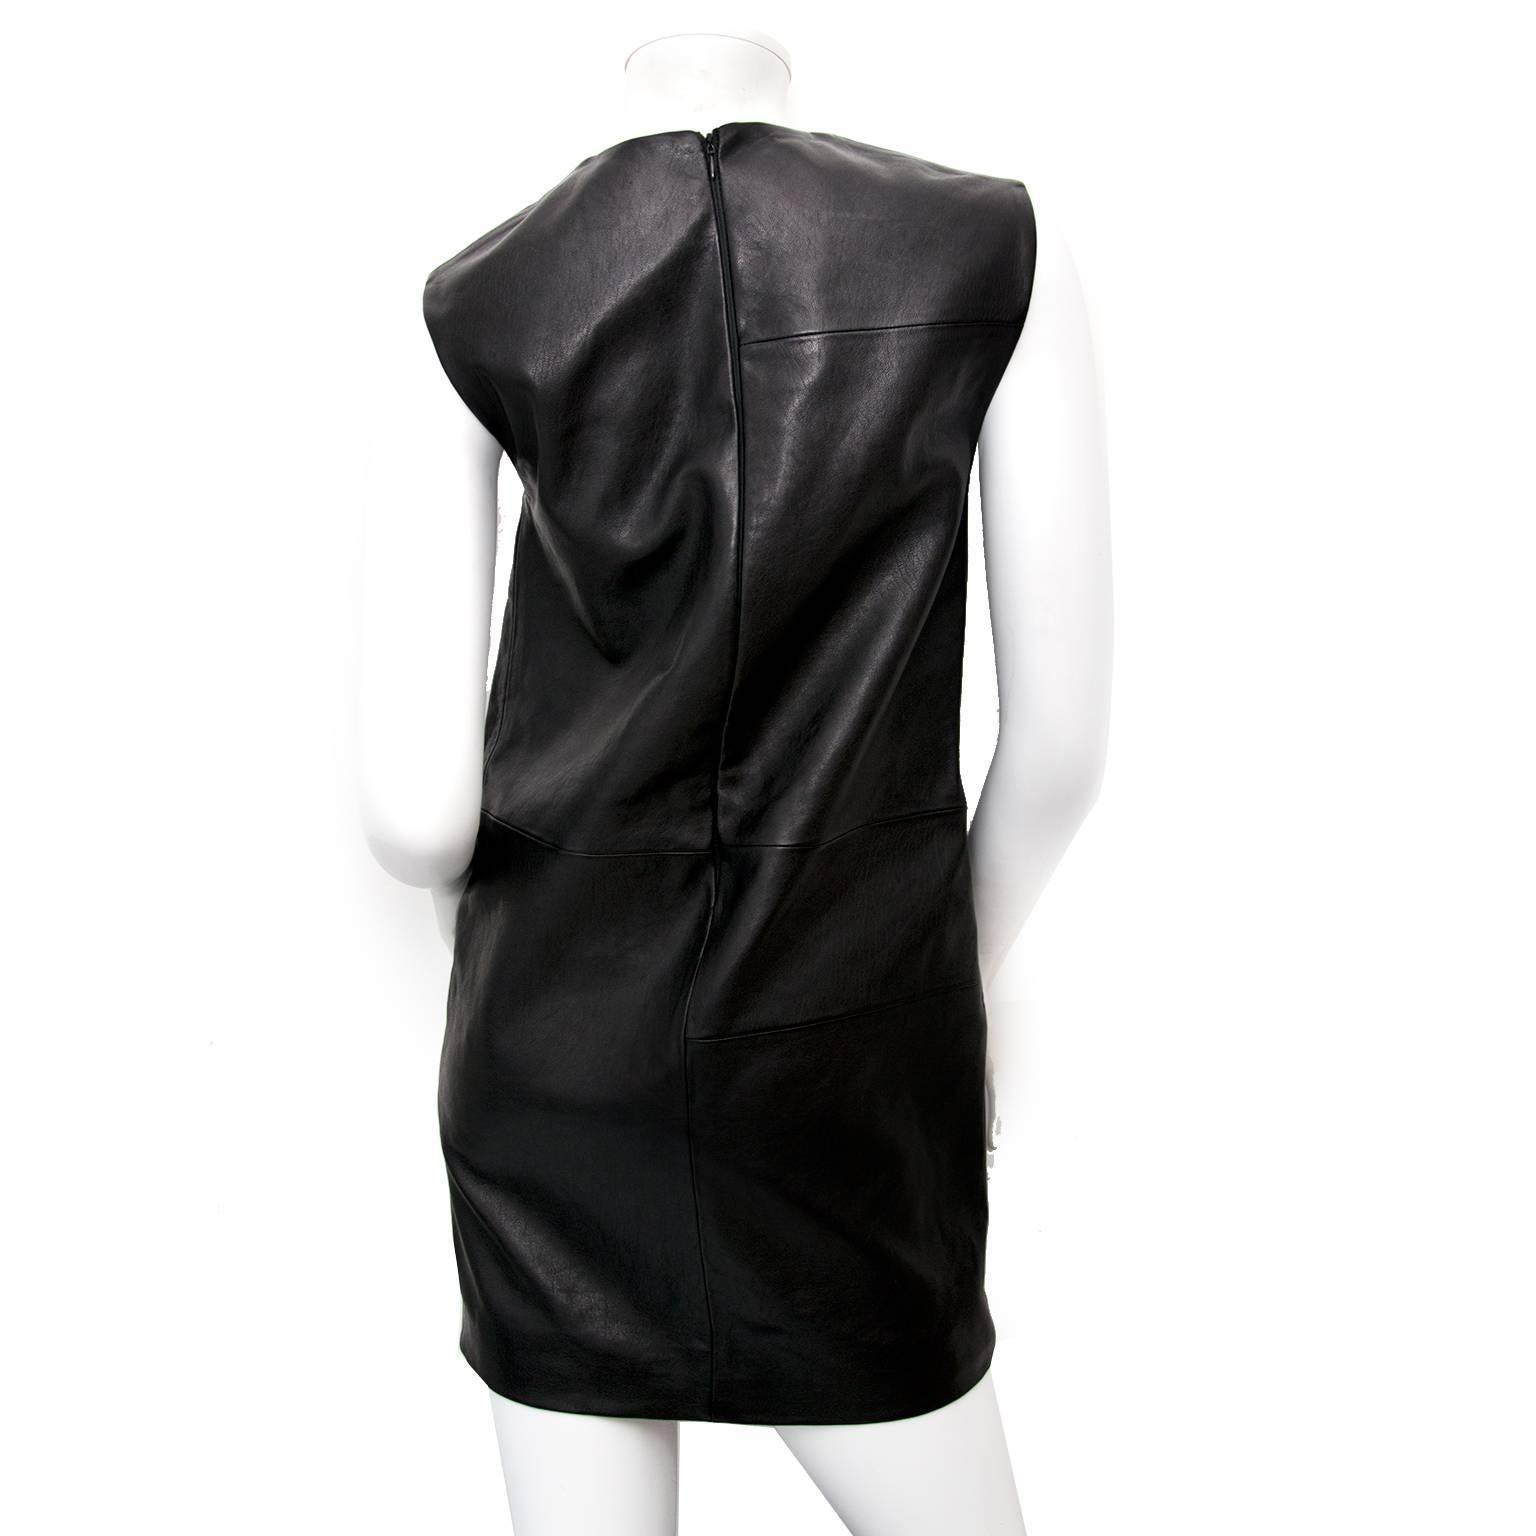 In very good condition.

Saint Laurent Mondrian Leather Shift Dress

The YSL classic 'Mondrian' shift dress was first designed in 1965, and is still very much on trend in this updated leathr version. The black leather enhances the simple silhouette,